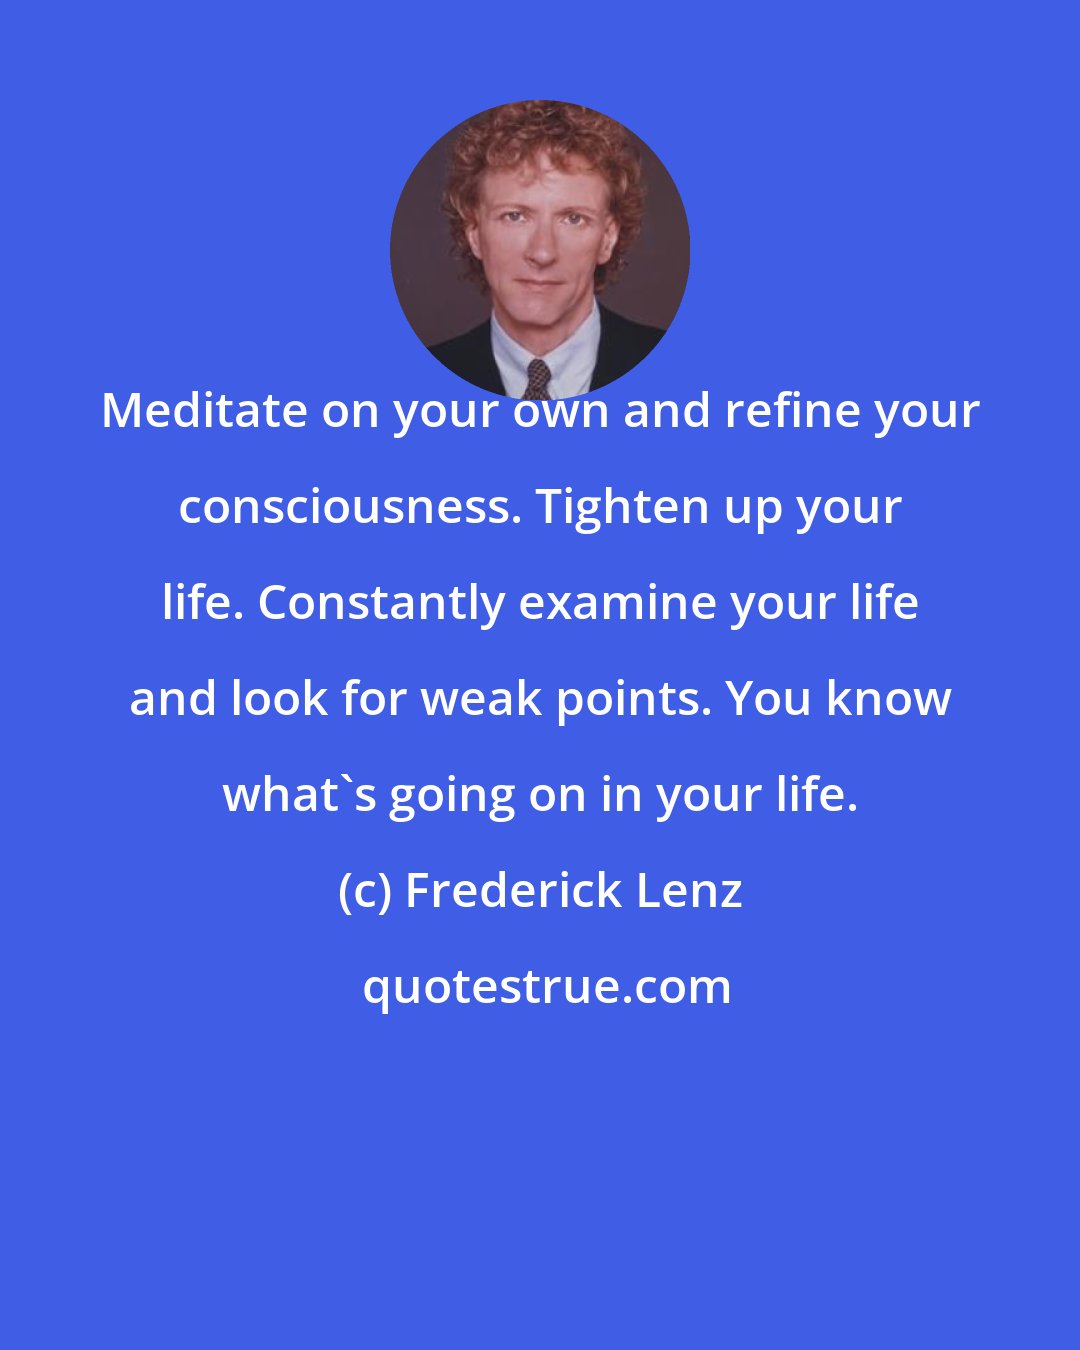 Frederick Lenz: Meditate on your own and refine your consciousness. Tighten up your life. Constantly examine your life and look for weak points. You know what's going on in your life.